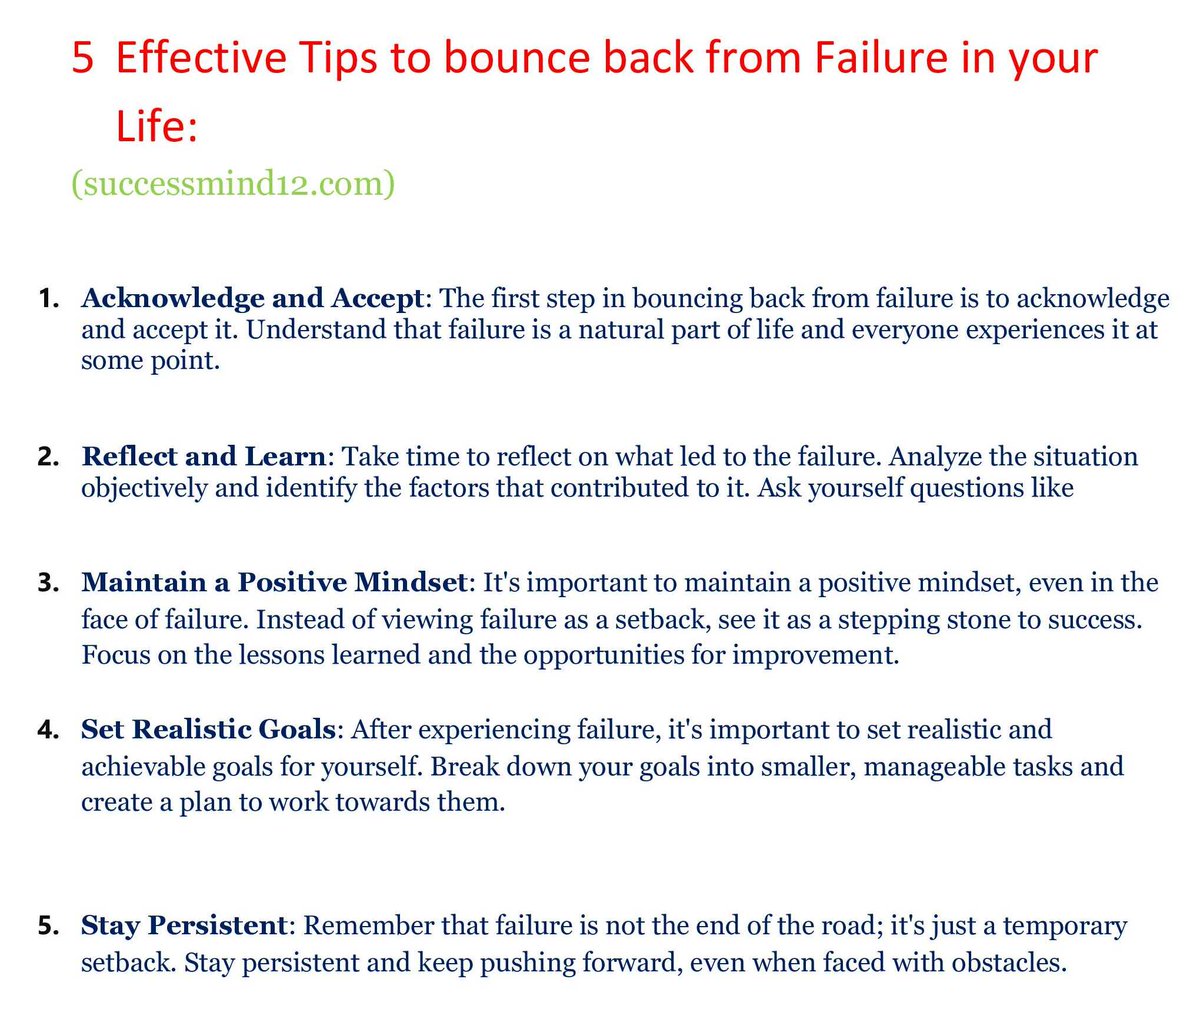 To develop a Mindset that can bounce back from any Failure 
Visit: shorturl.at/cdHLV

#SuccessJourney #SuccessAwaits  #ProductivityTips 
#ProductivityBoost #GrowthDrive #CareerOpportunity 
#CareerGoals  #jobseekers #jobsearch #mindsetmatters #GoalSetting